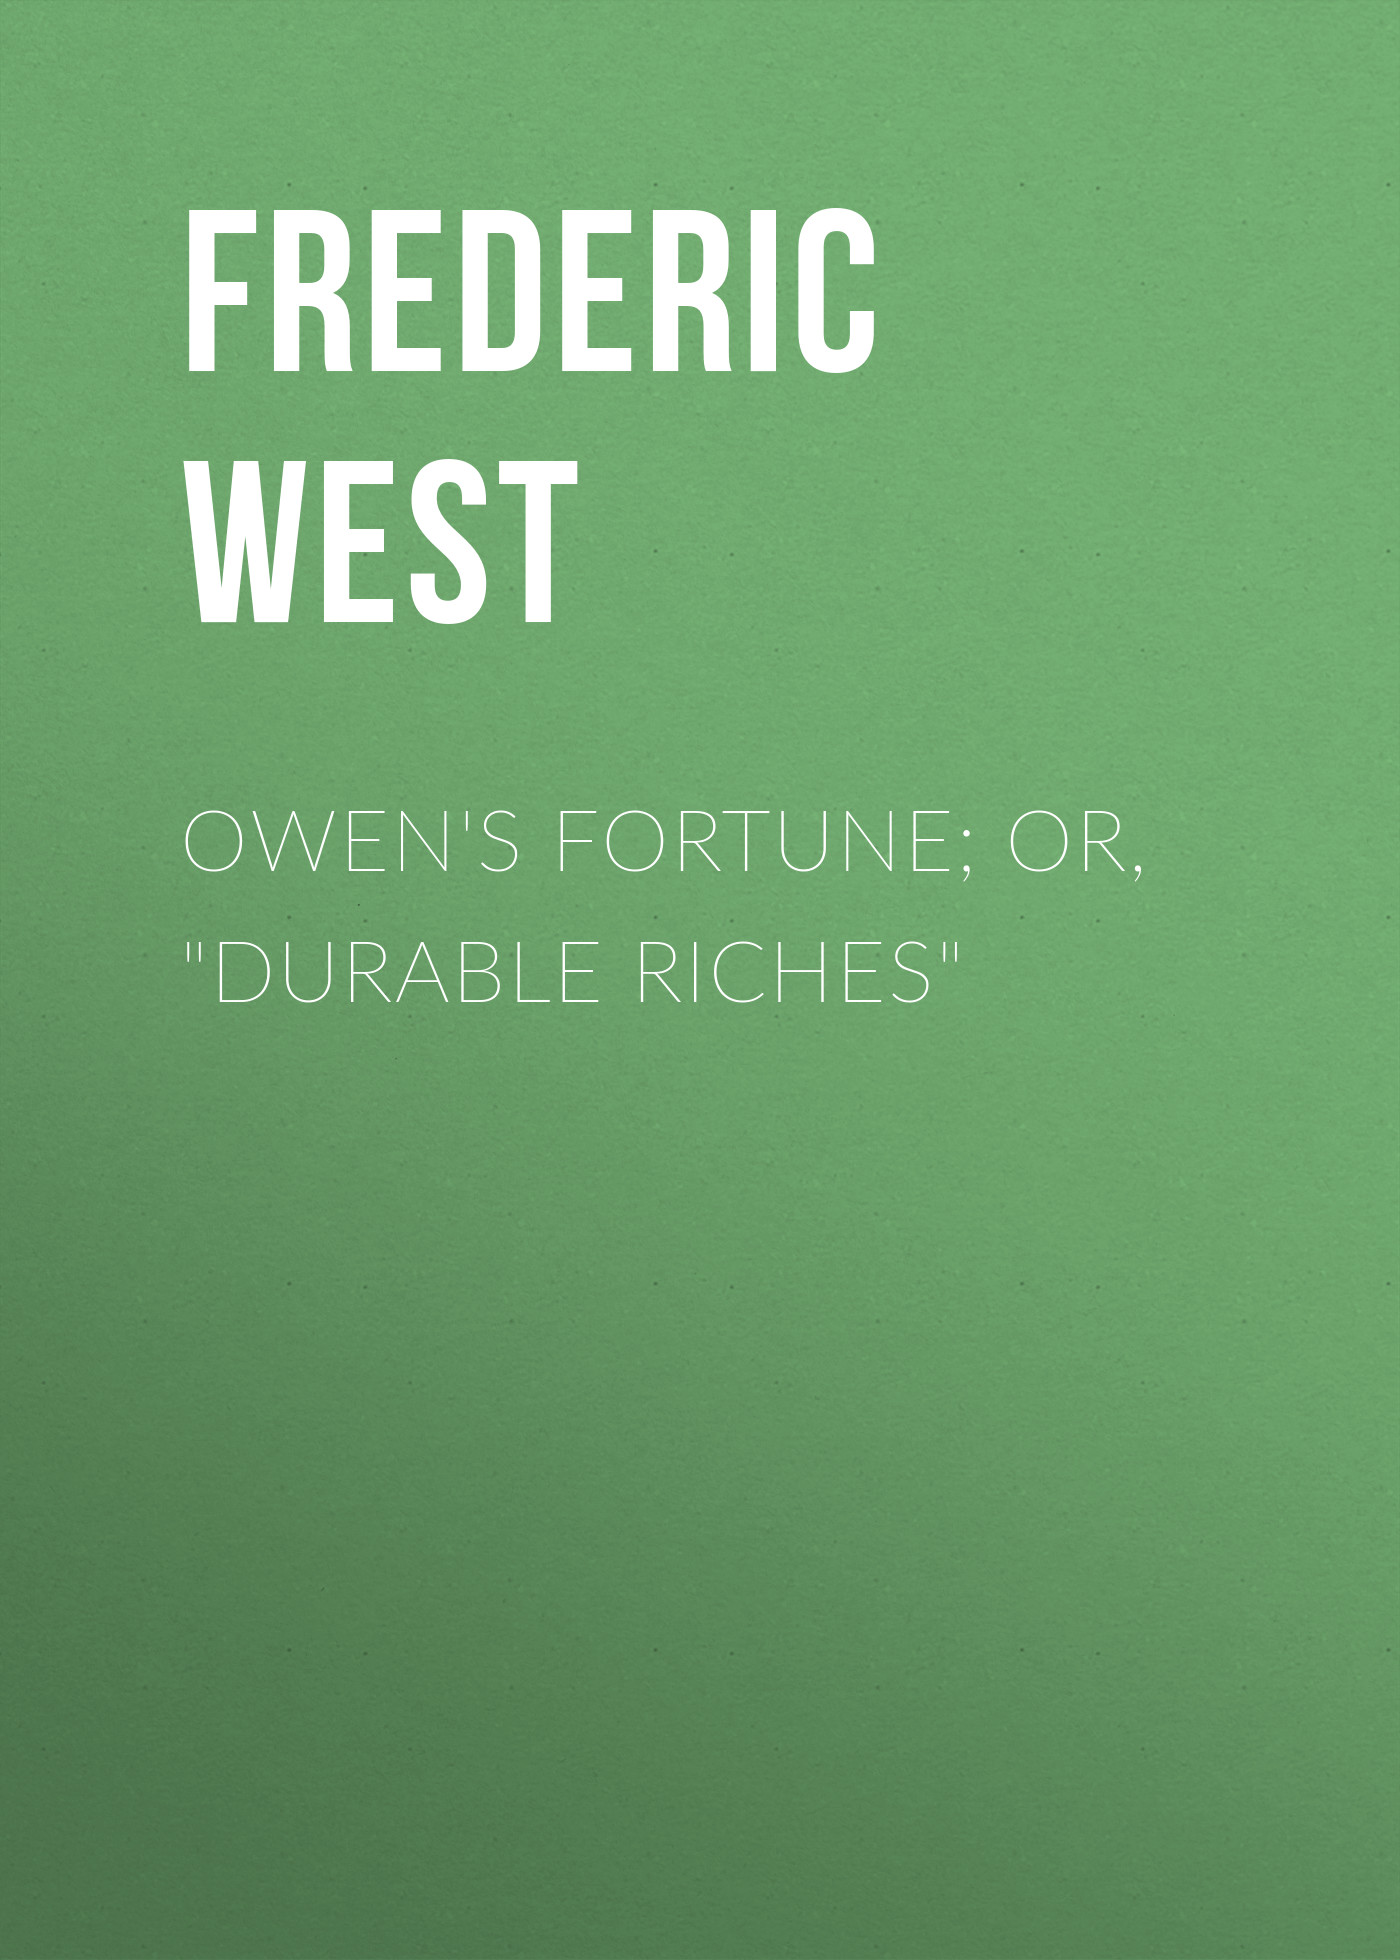 Owen's Fortune; Or,"Durable Riches"